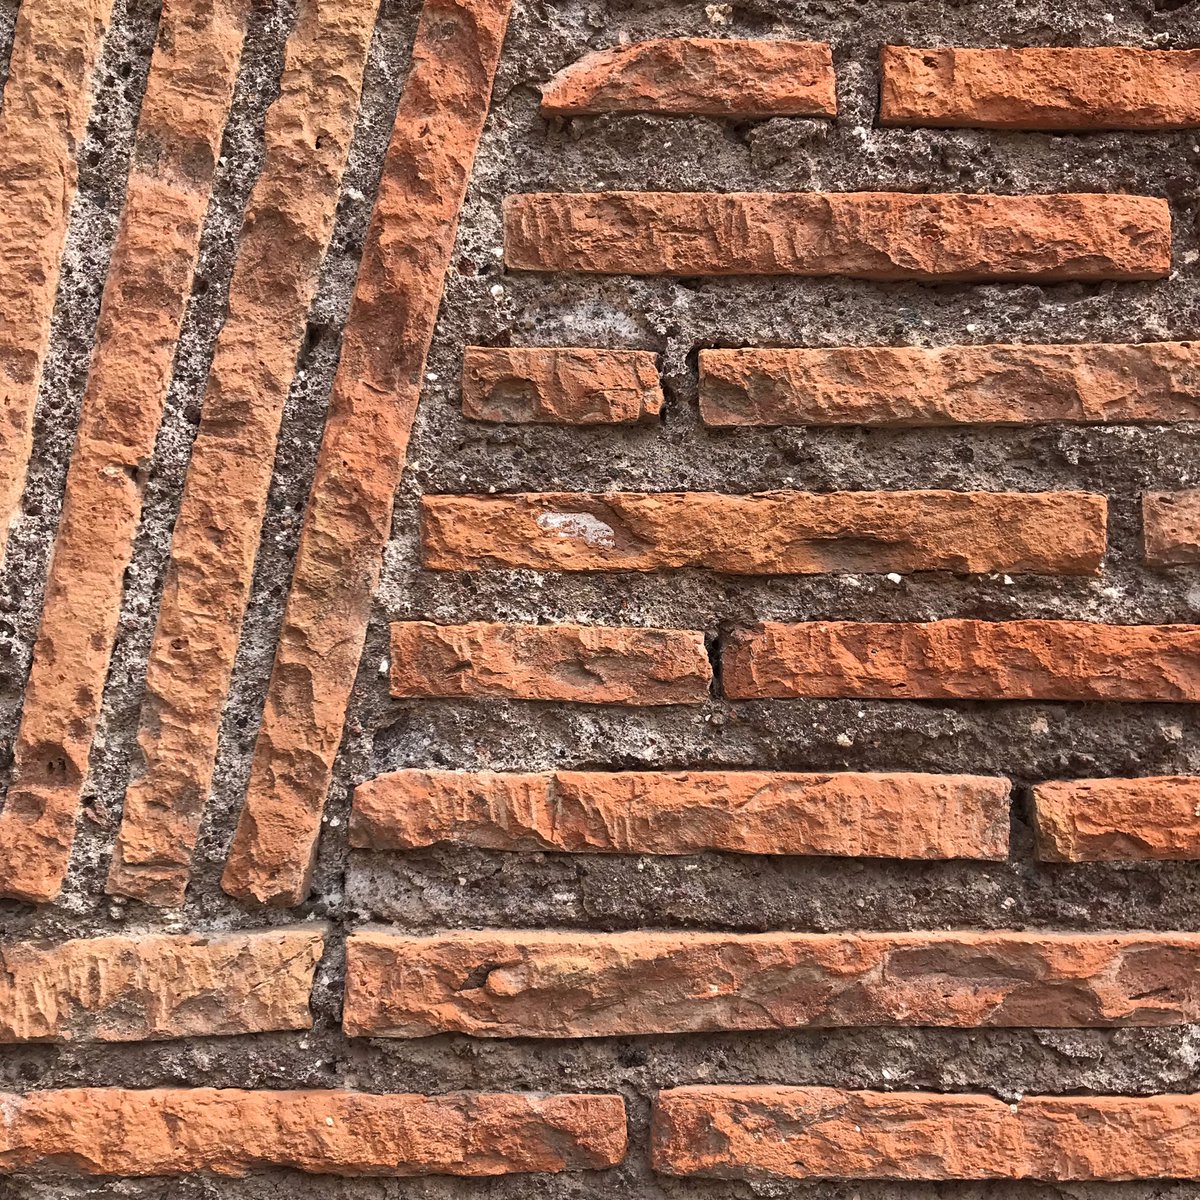 Really, it wasn’t until the 15th century that brick came back into widespread use.2/